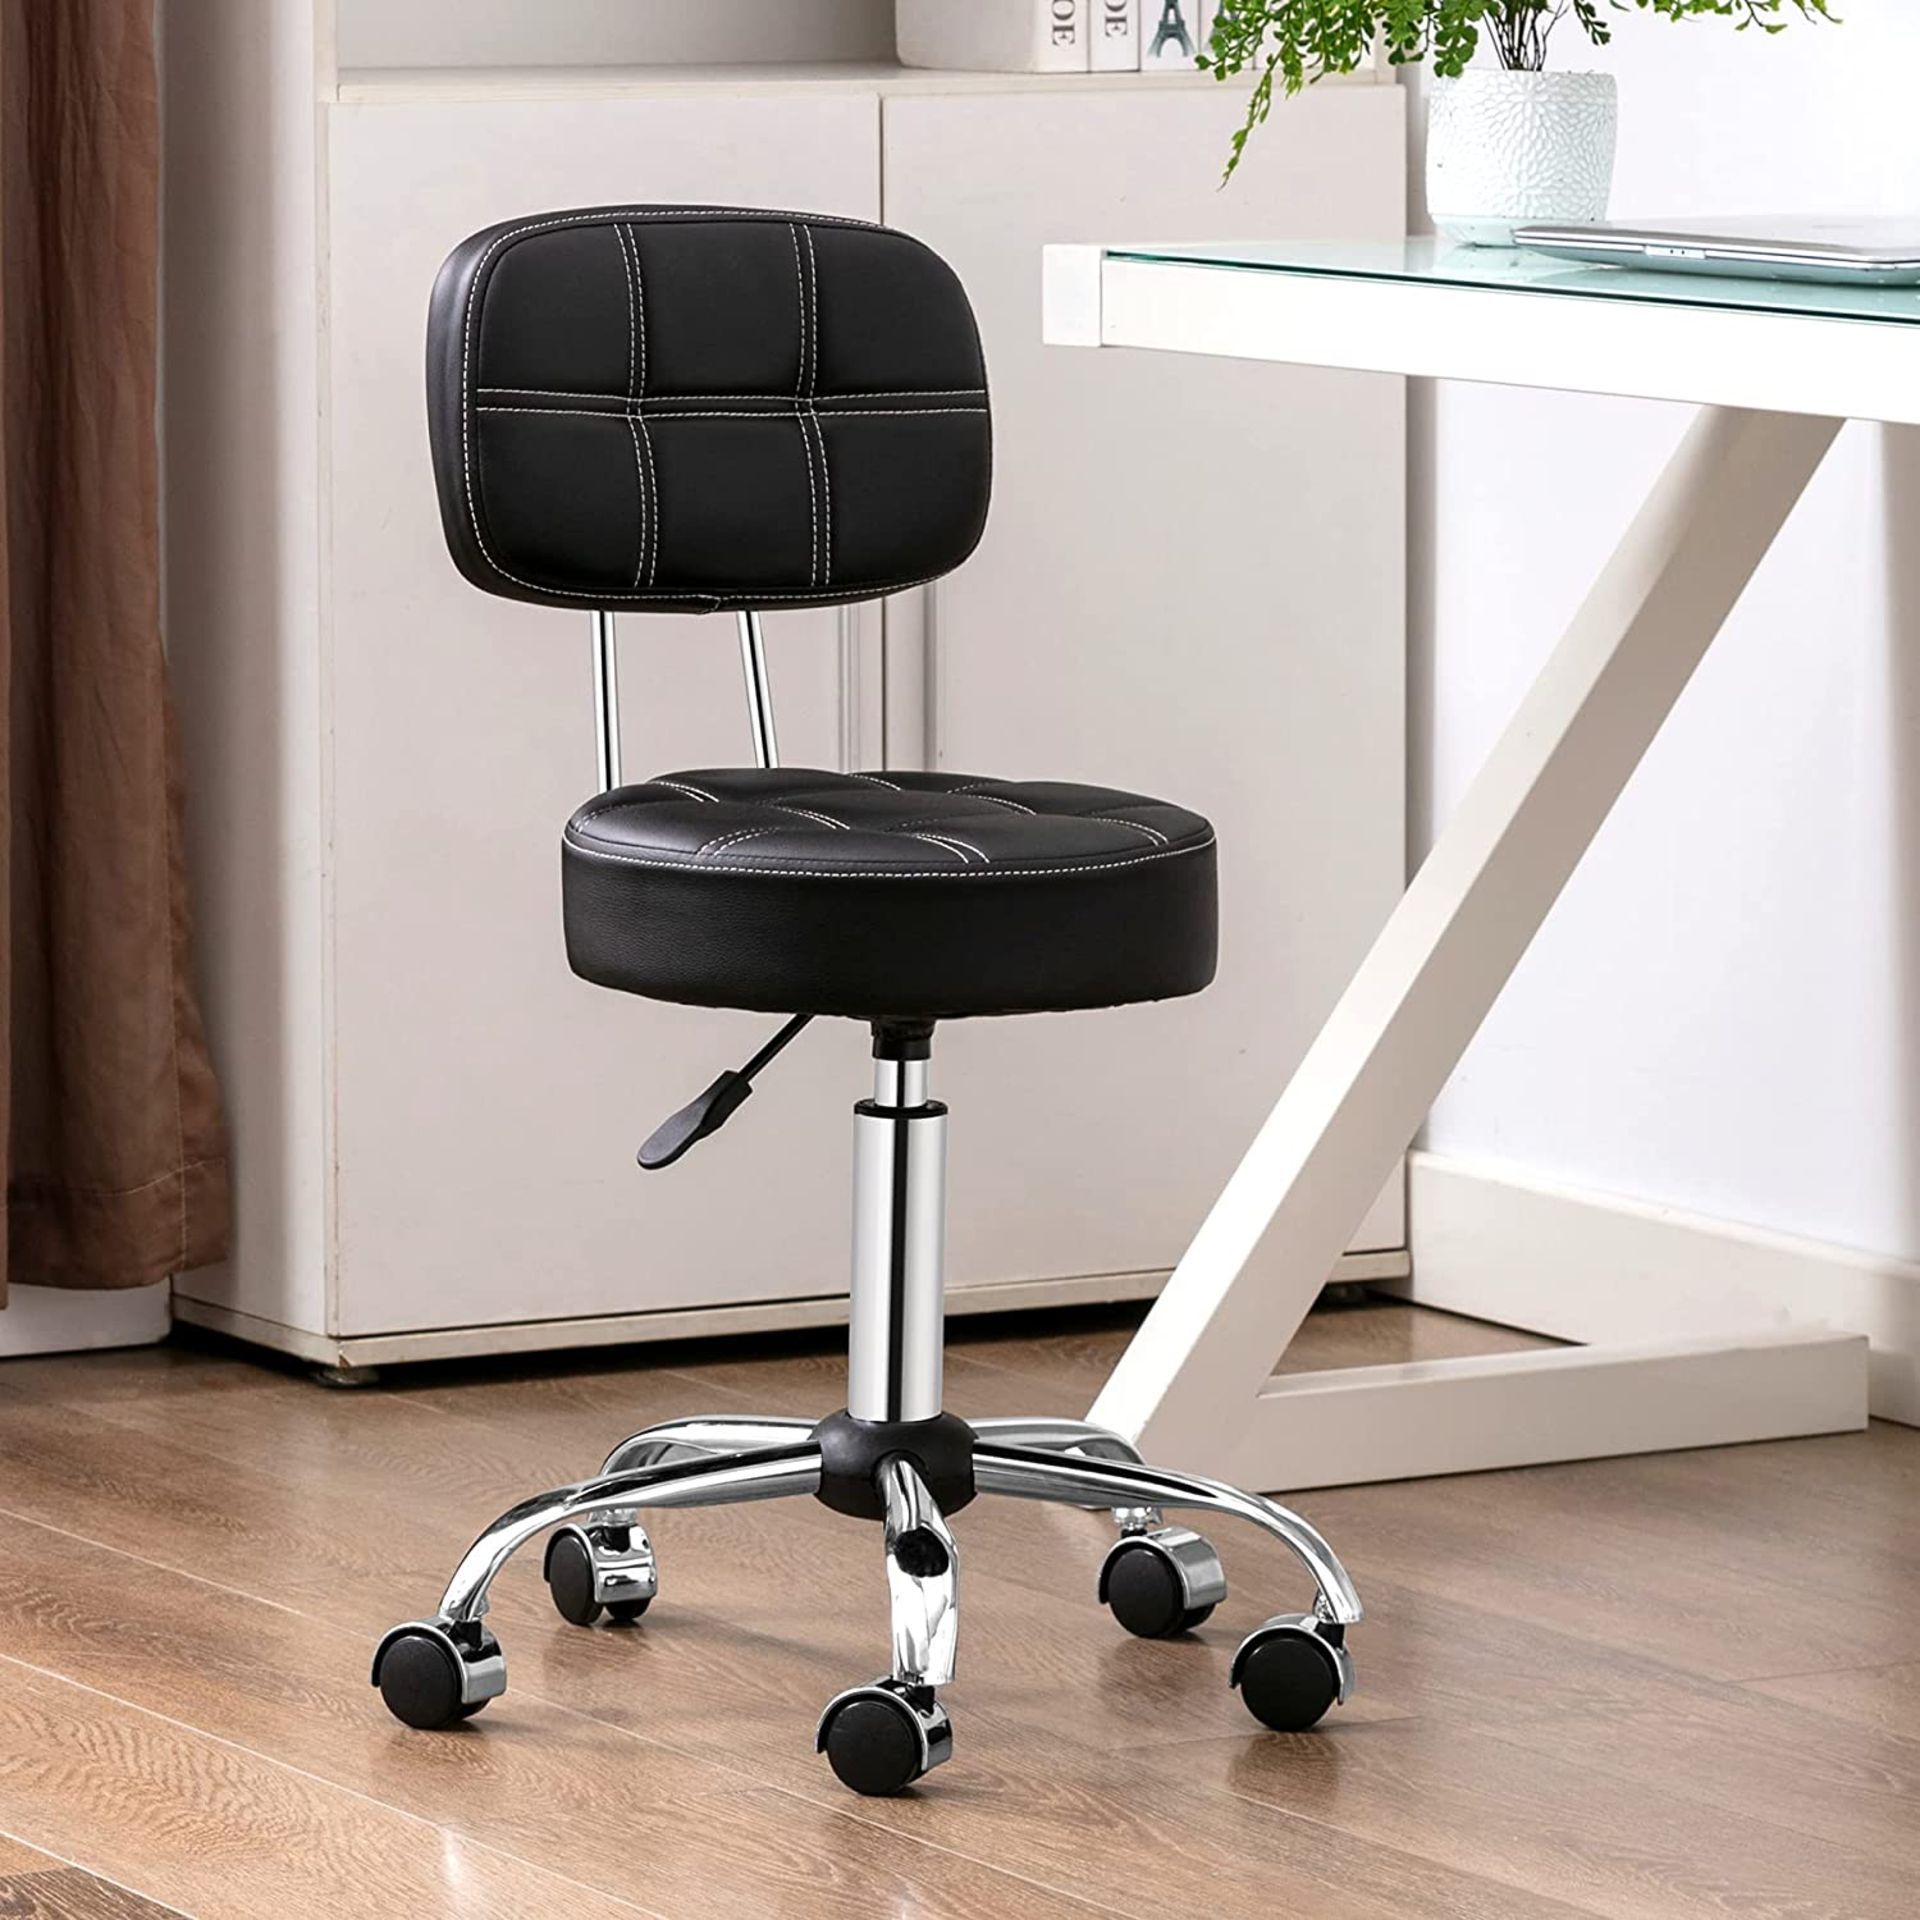 NEW Rolling stool with High Backrest, Leather Massage Stool Ergonomic Drafting Chair for Home Swivel - Image 3 of 5